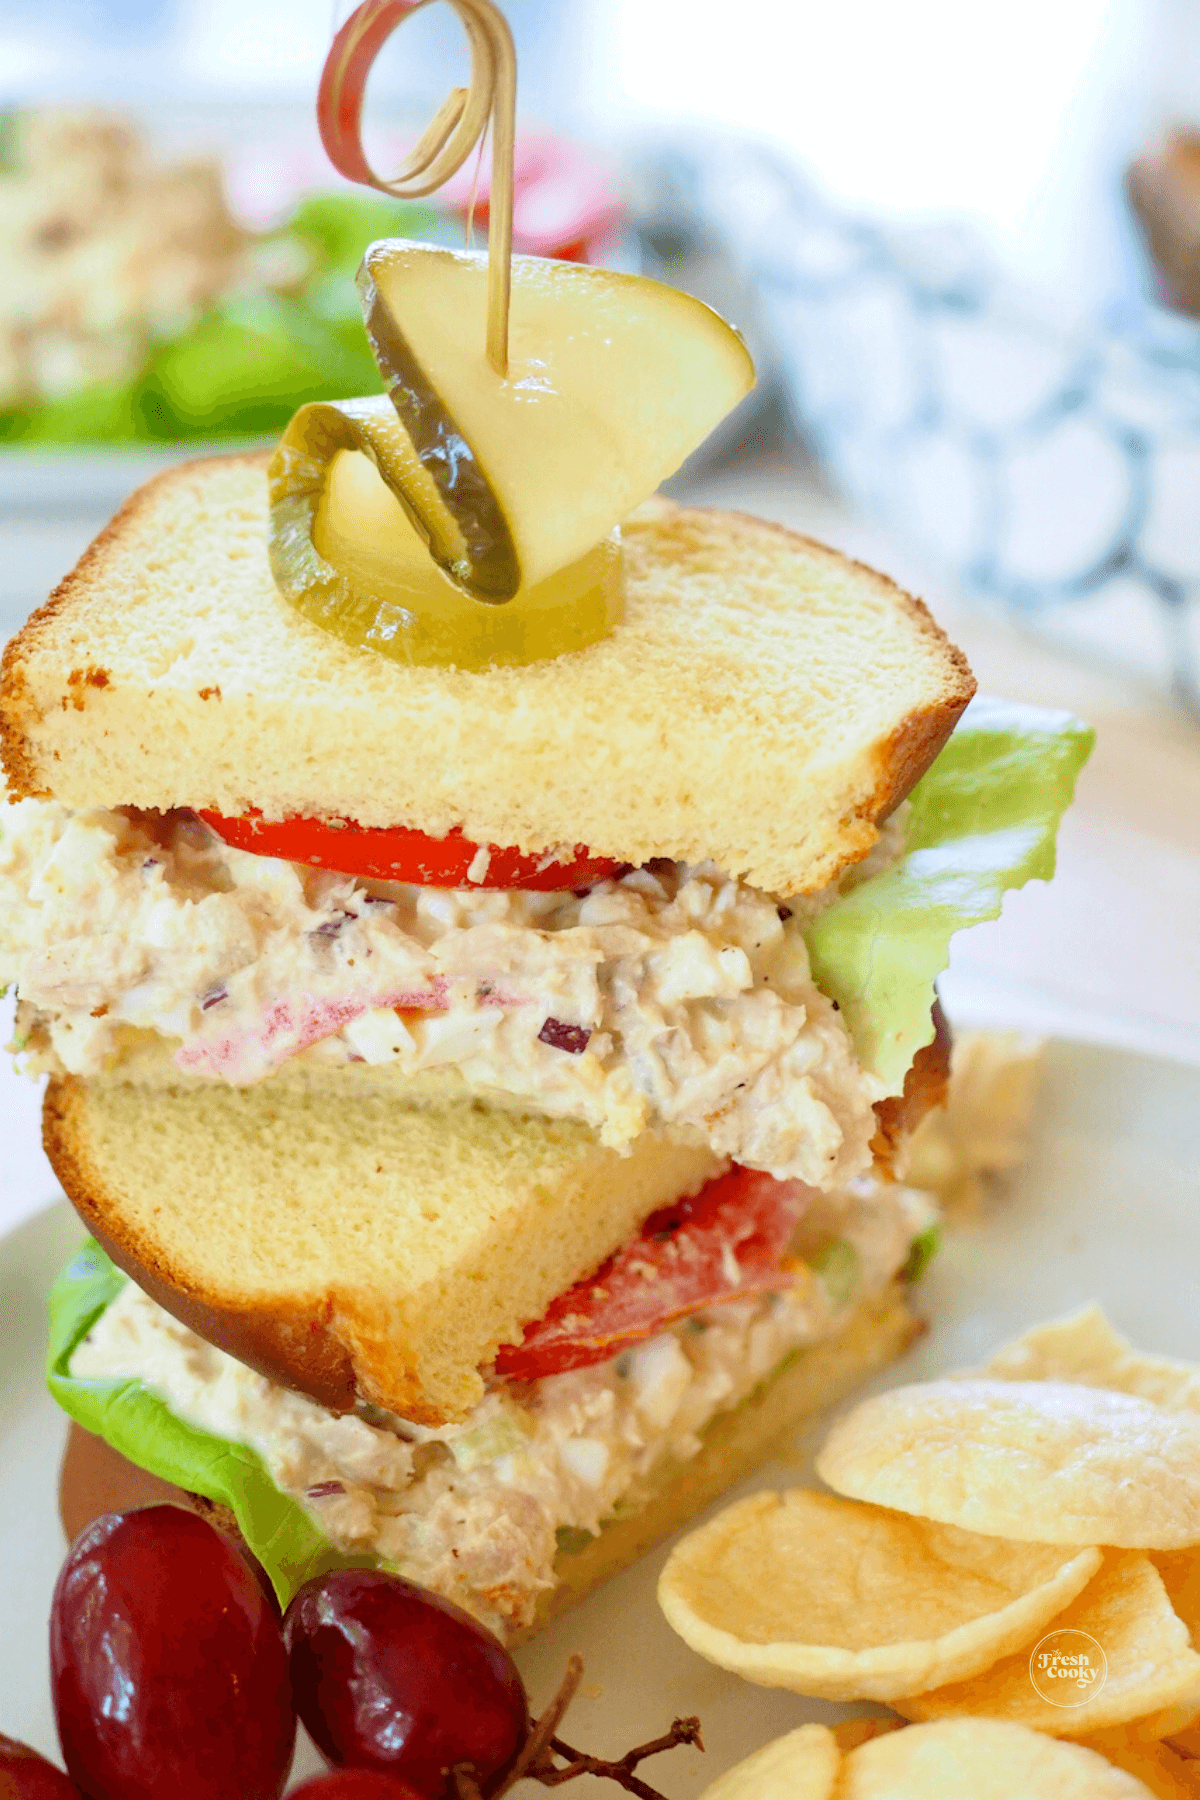 Tuna salad sandwich using brioche bread, served with pickle, chips and red grapes.